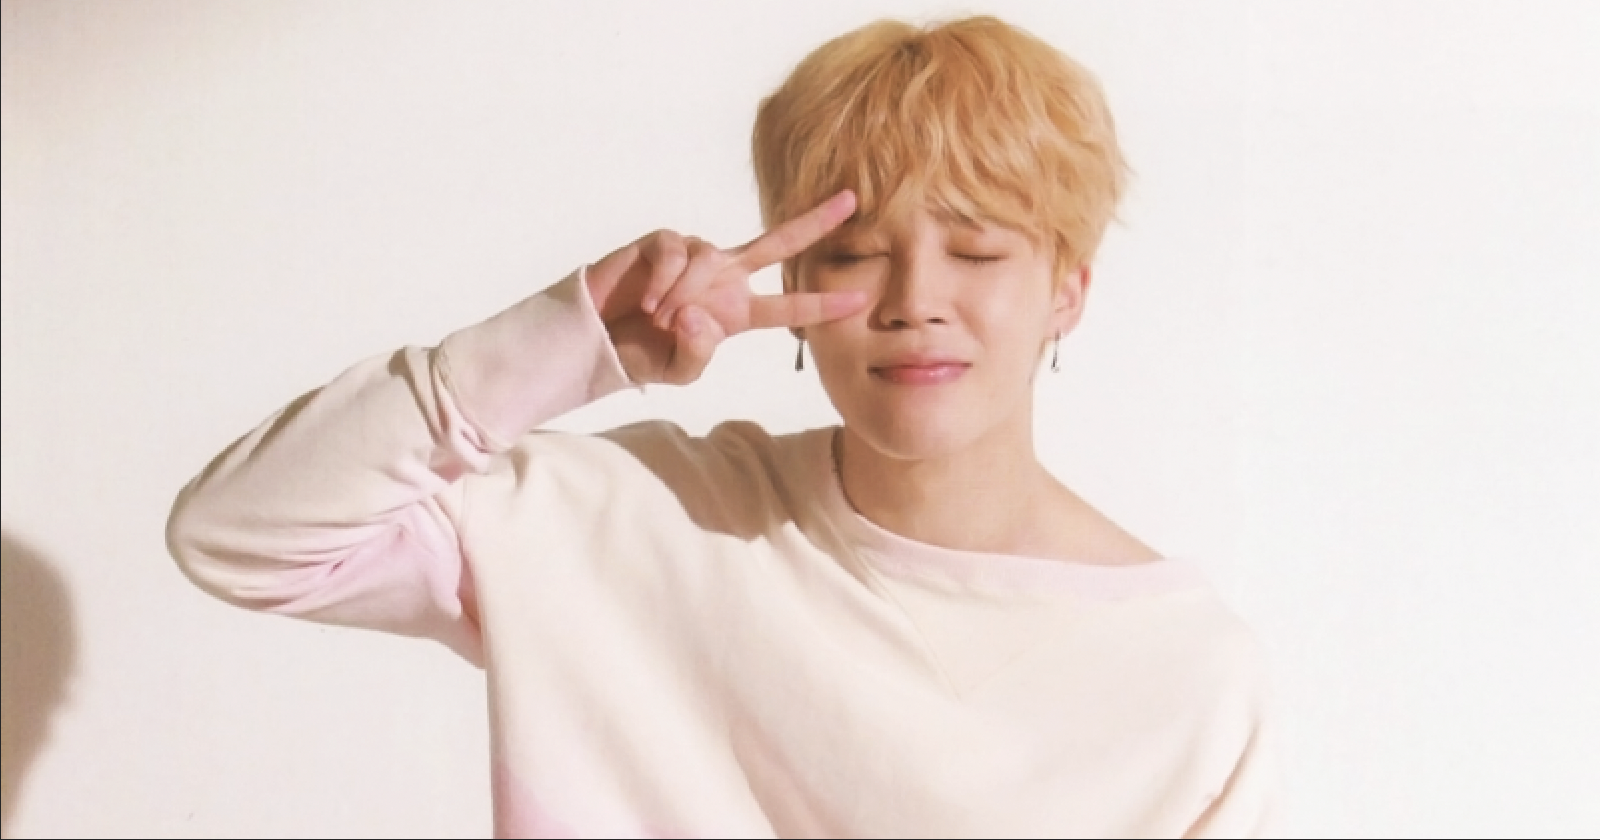 BTS Jimin Secretly Gives Donation for Polio Patients